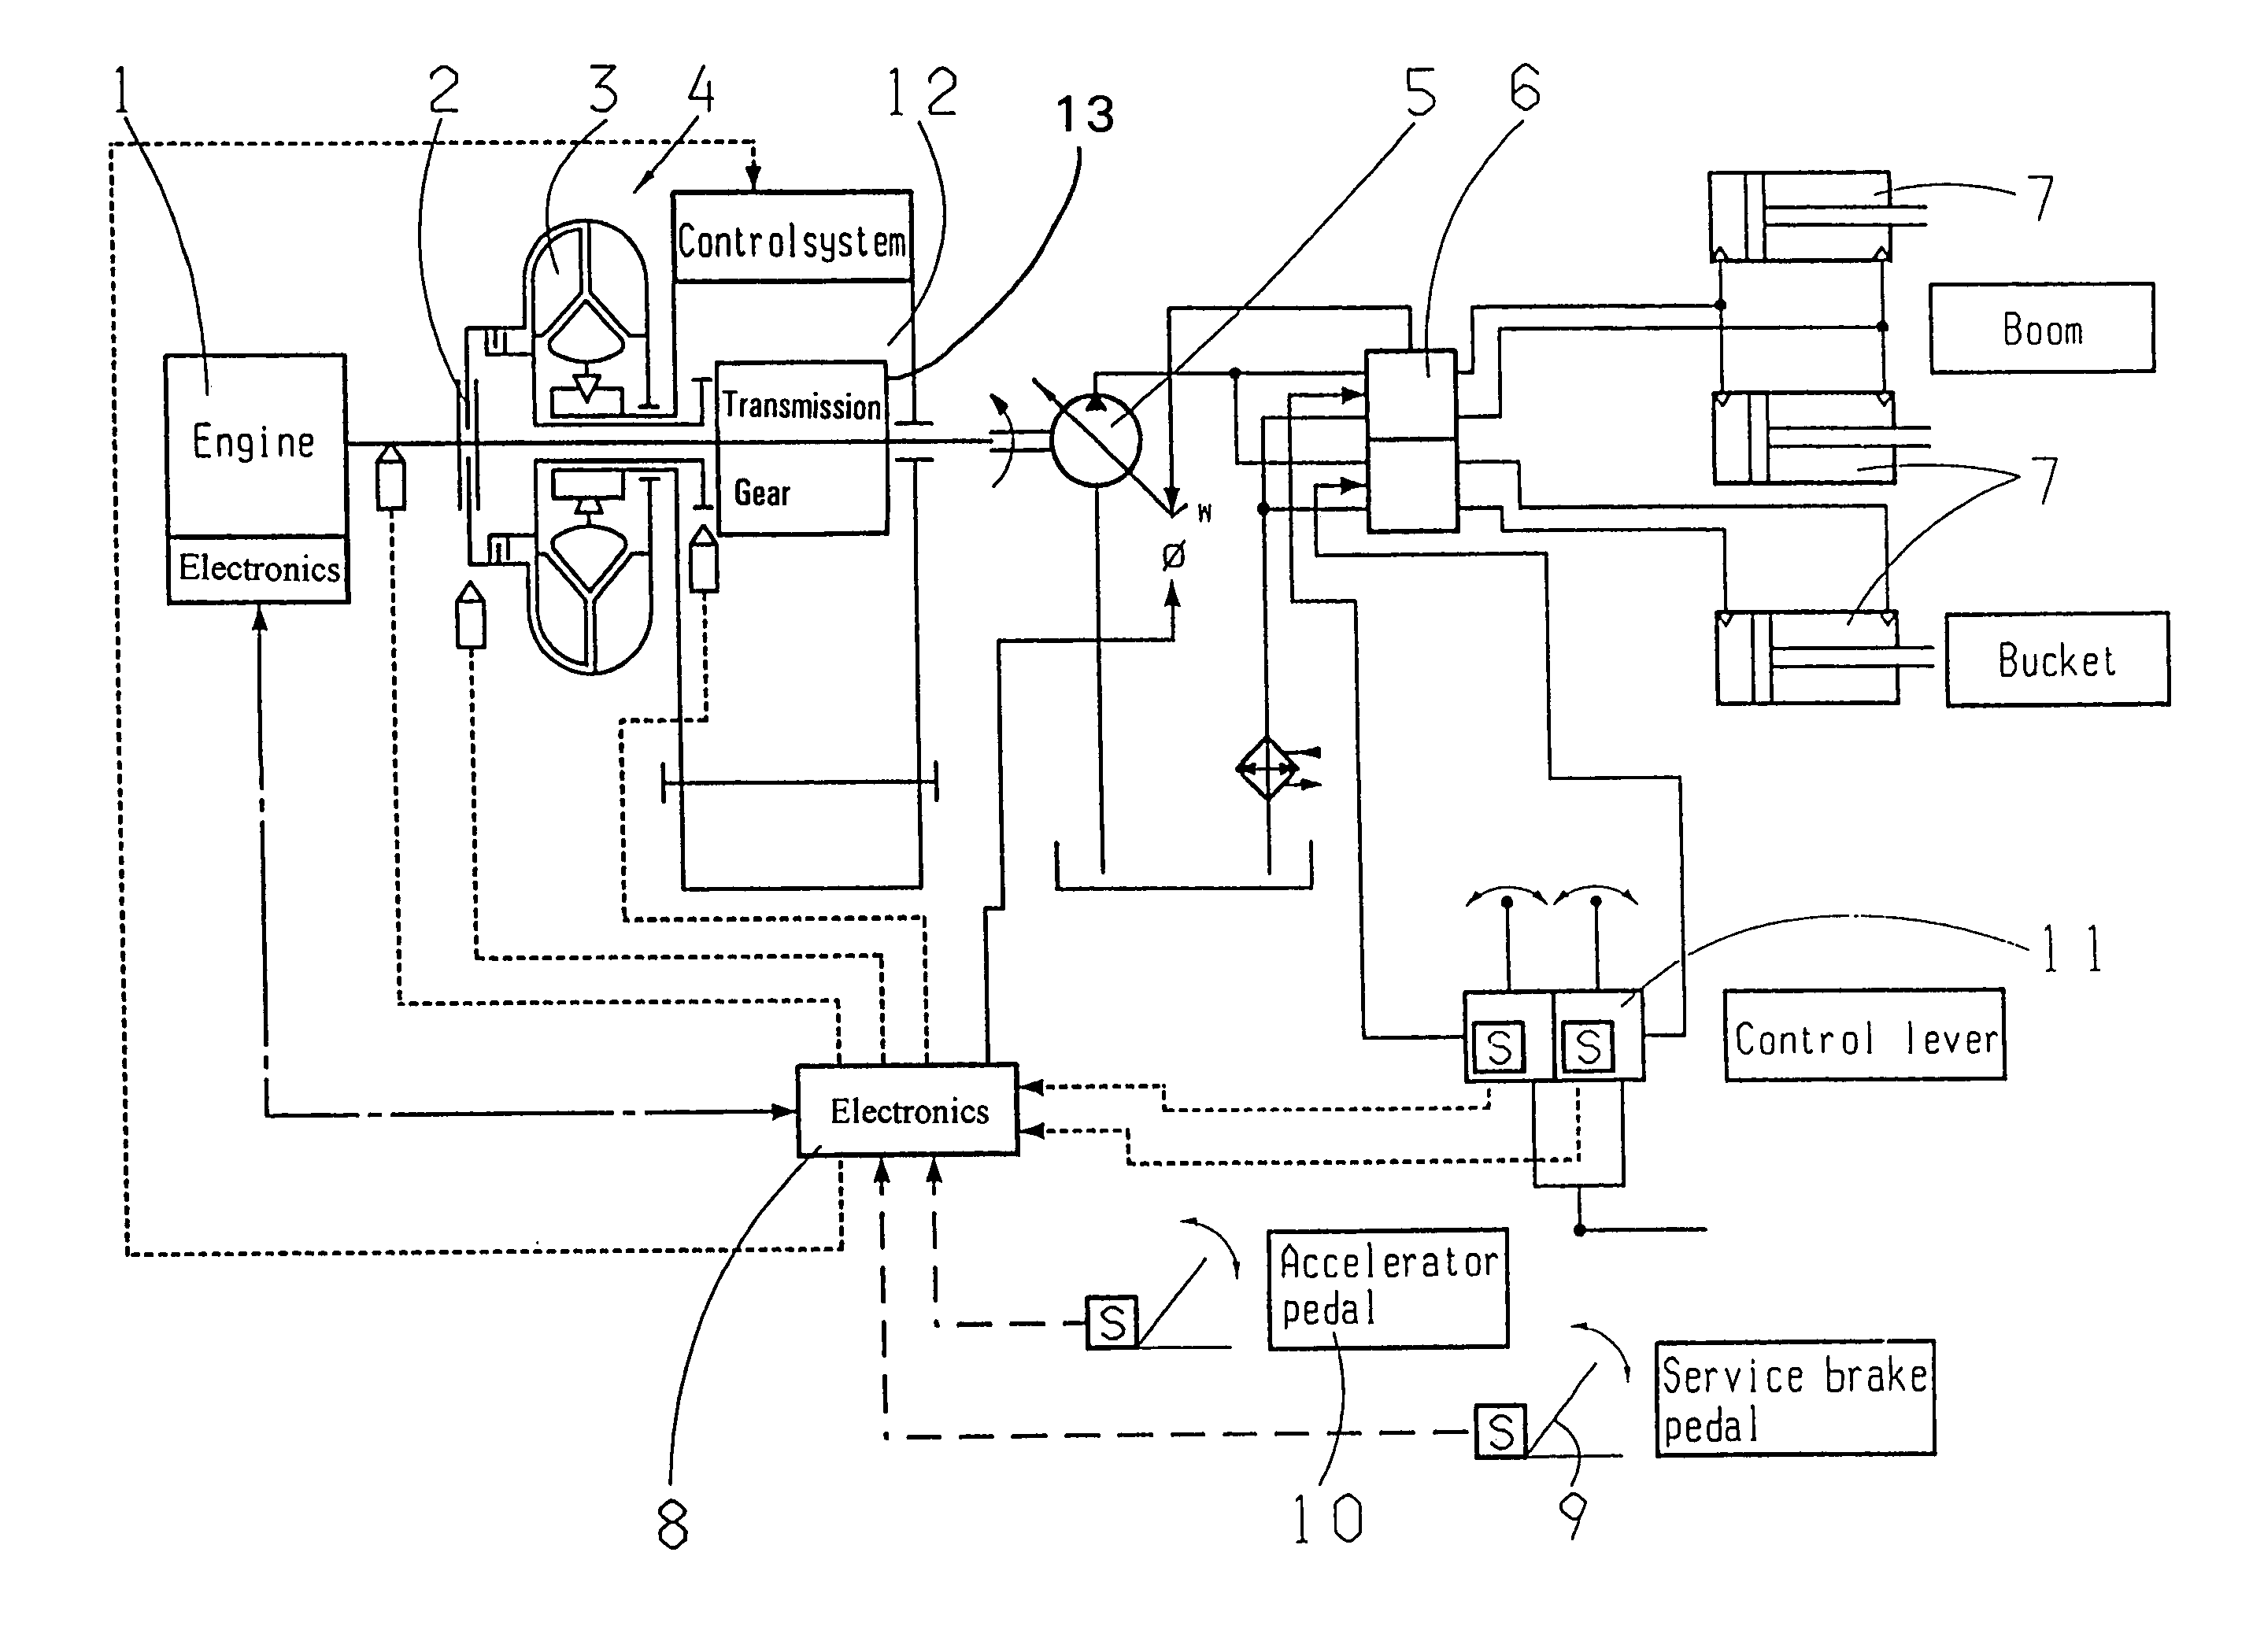 Drive train for powering a mobile vehicle